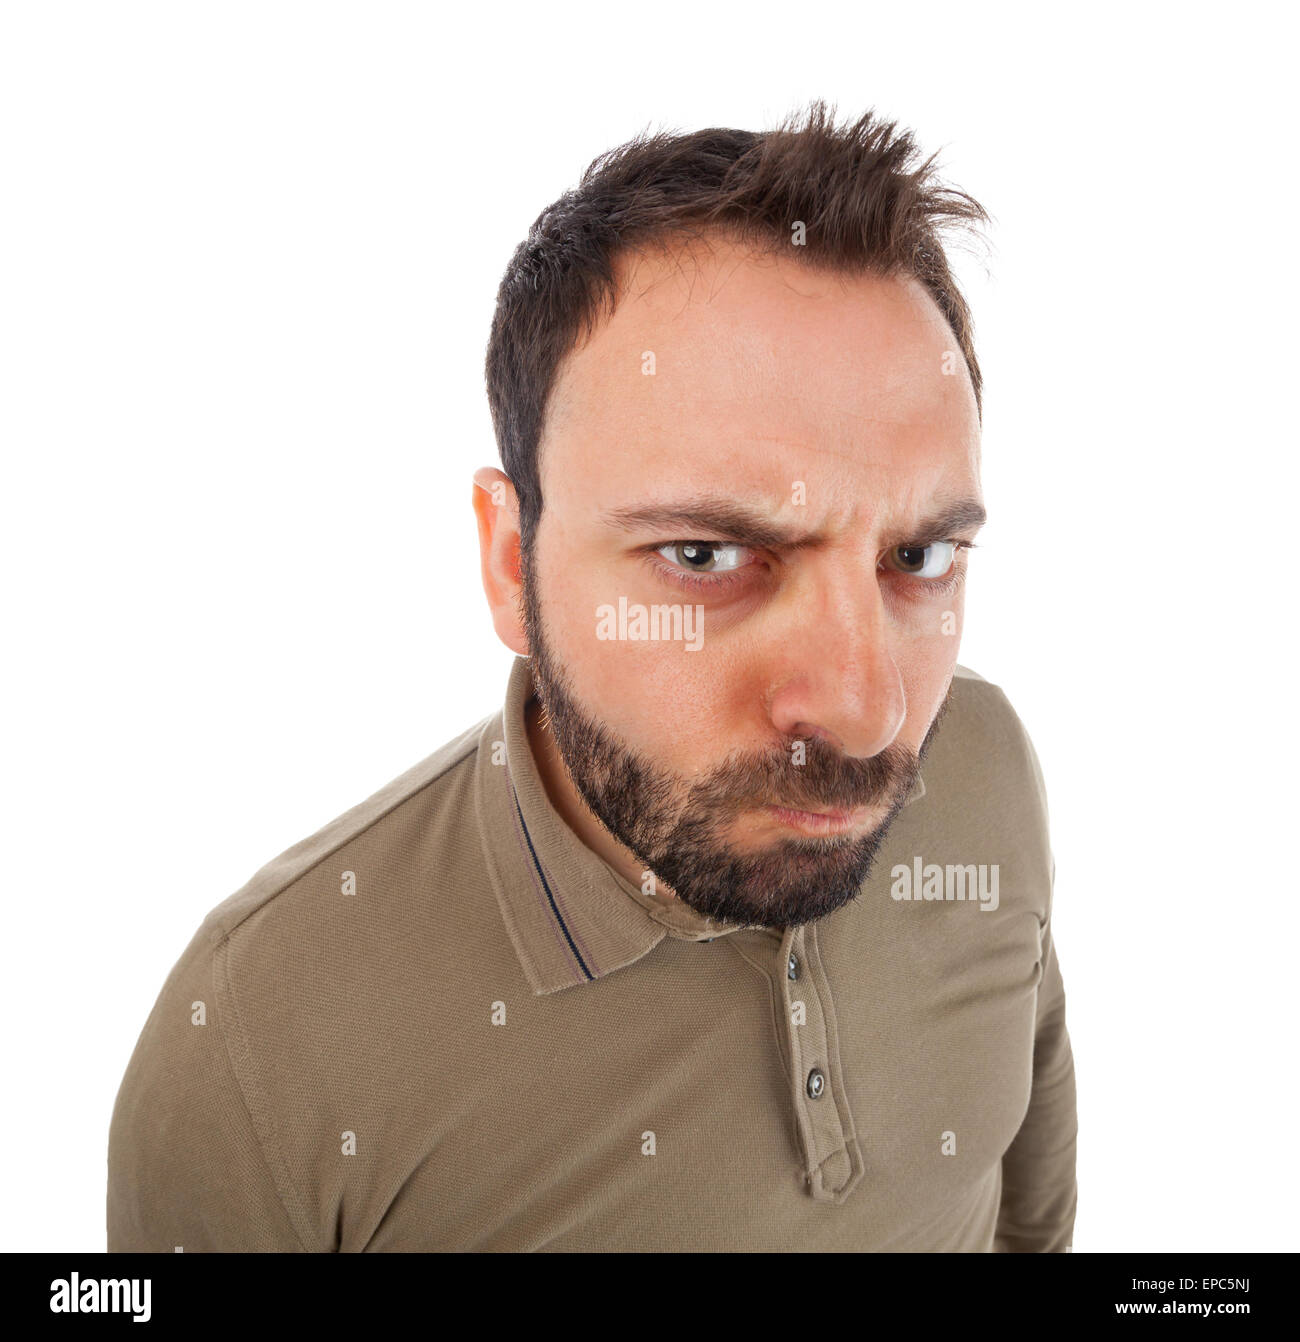 Young man with angry expression on white background. Stock Photo